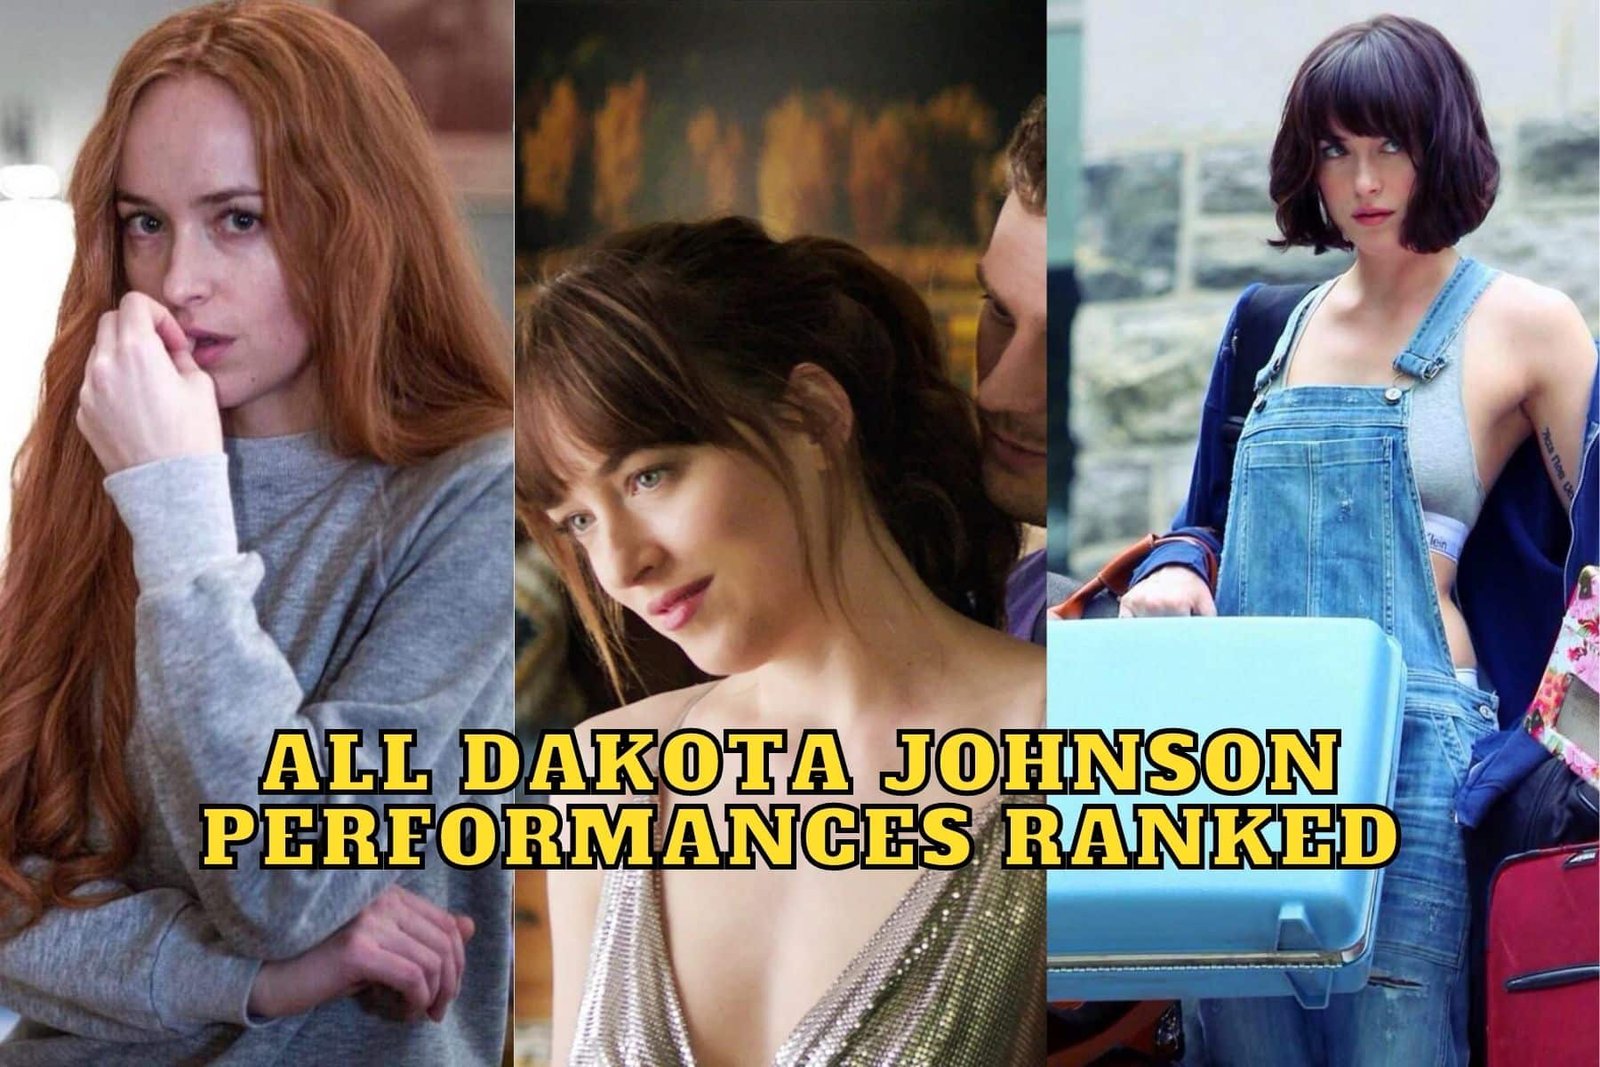 All Dakota Johnson Performances Ranked From Best to Worst - Including Persuasion